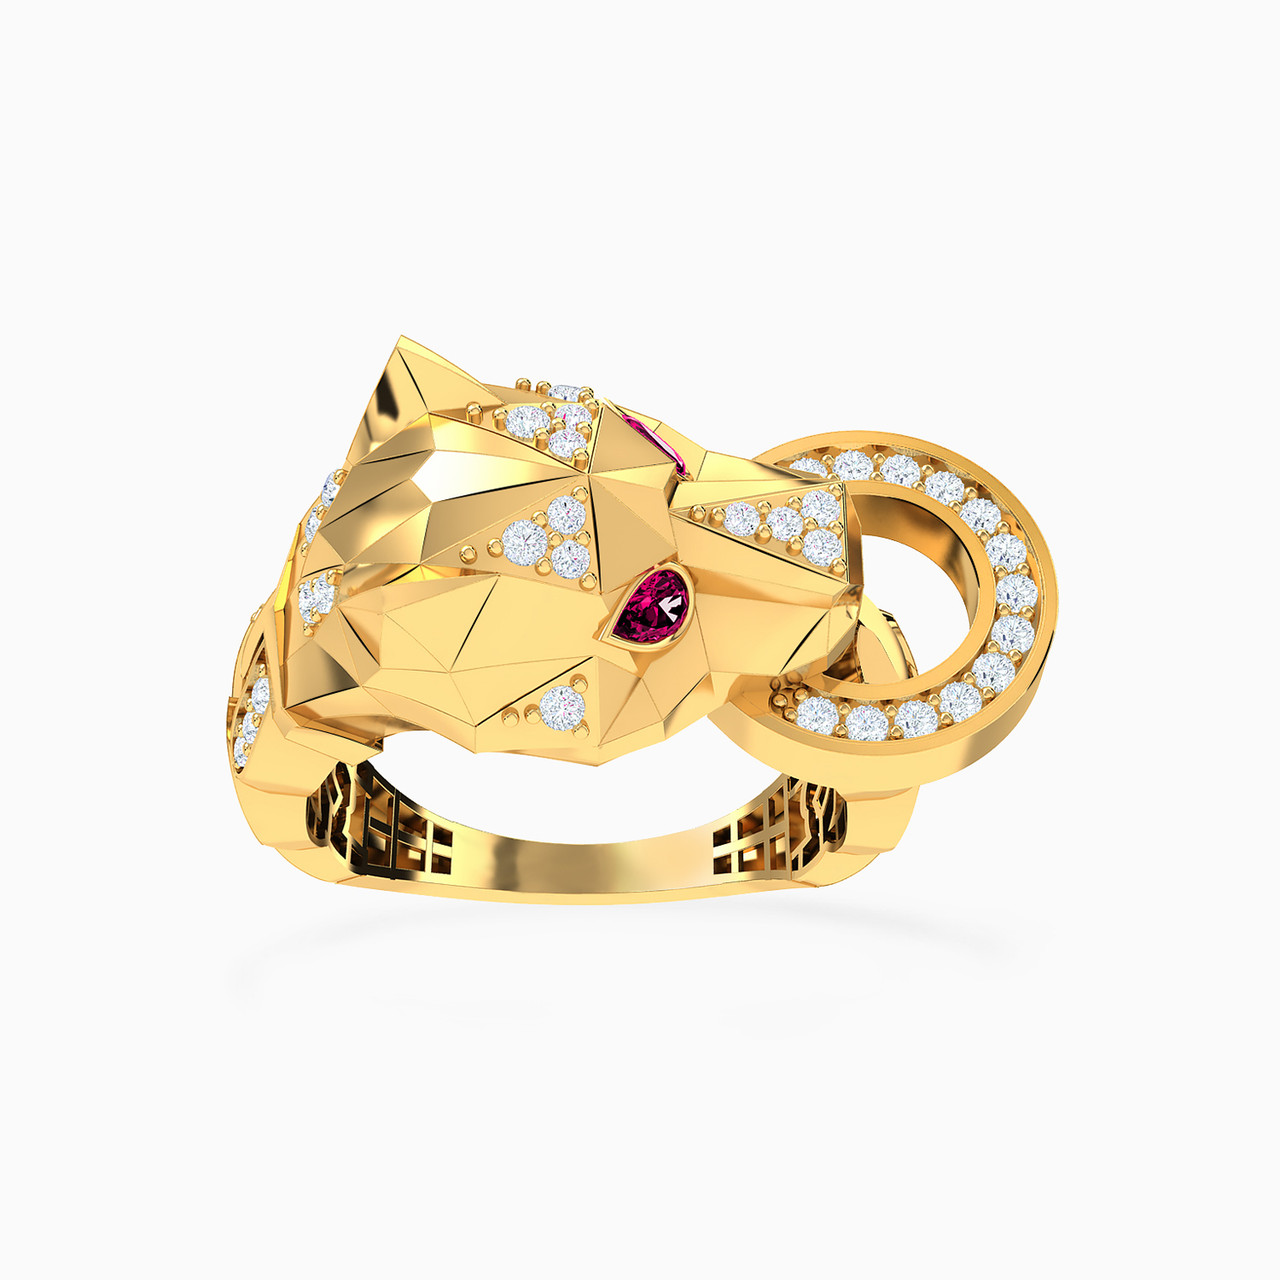 21K Gold Colored Stones Statement Ring